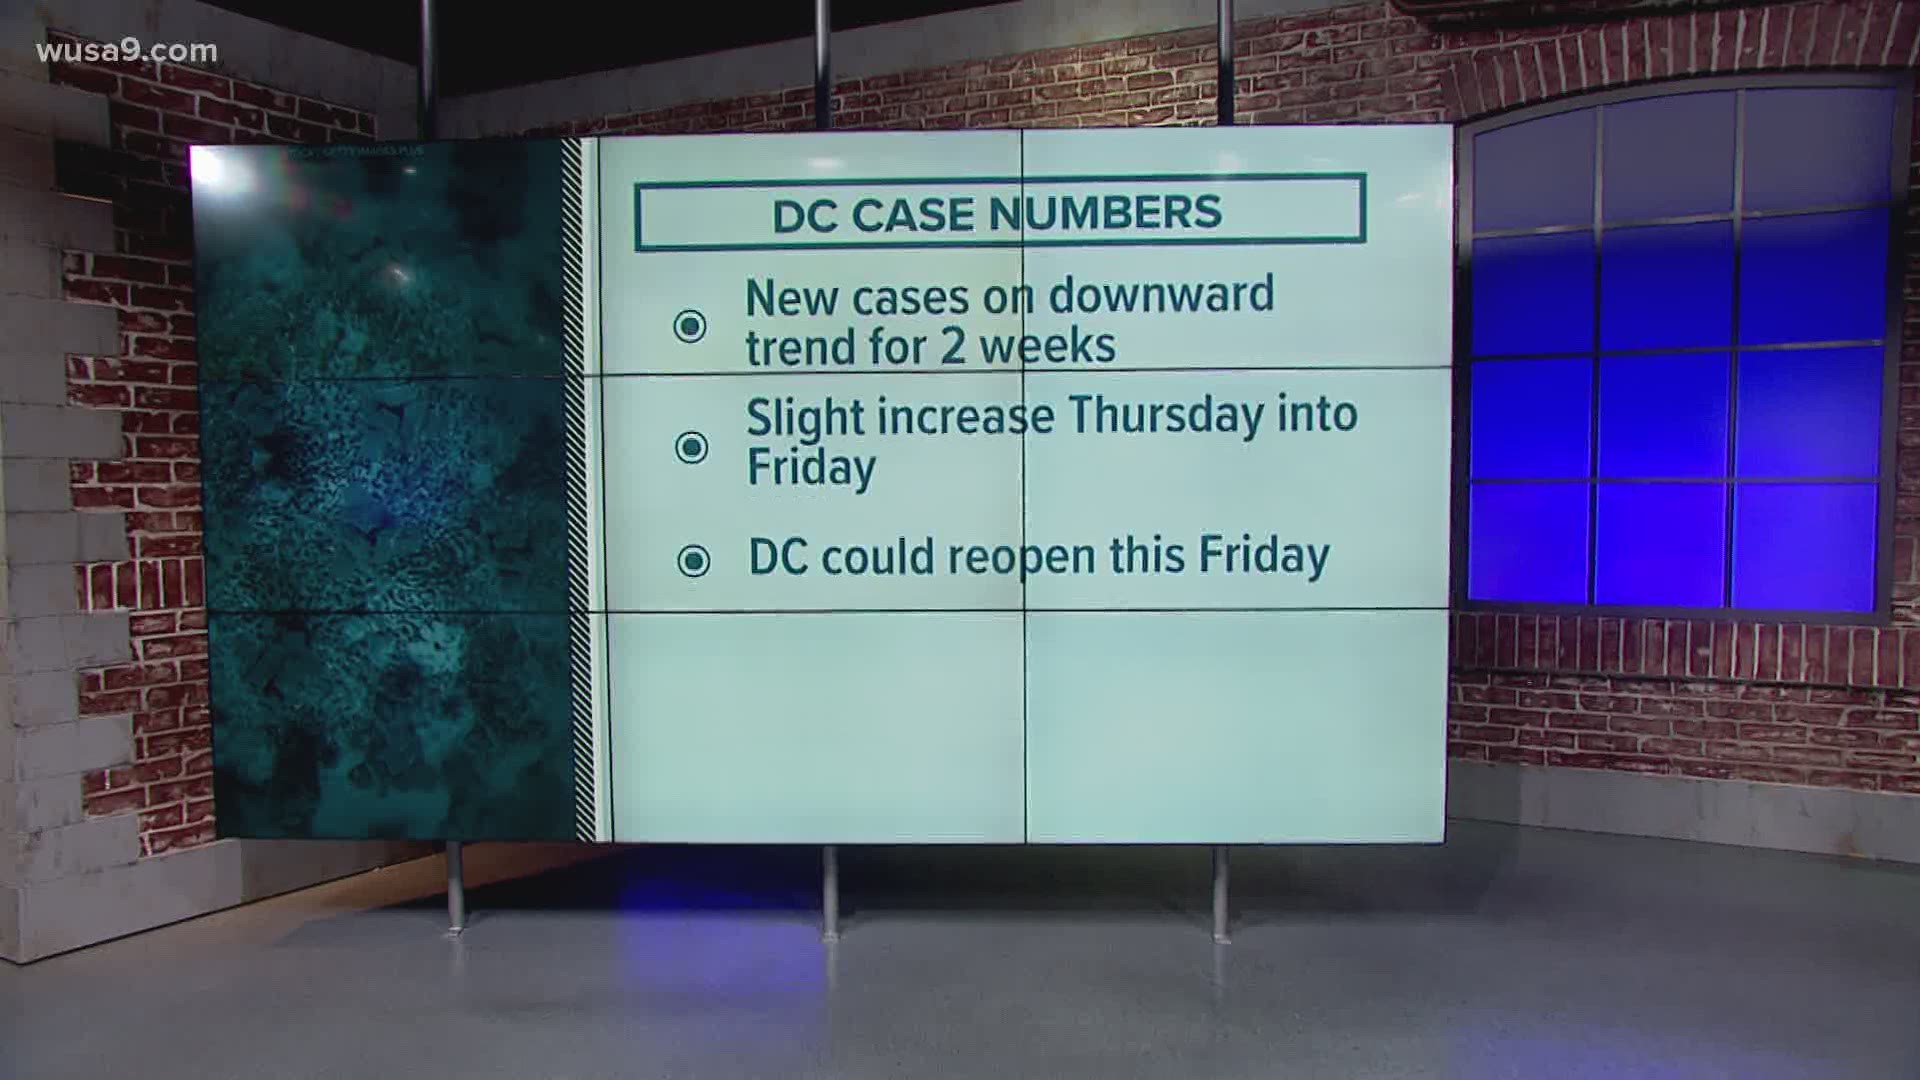 Here is a look at the latest coronavirus updates for D.C., Maryland and Virginia.